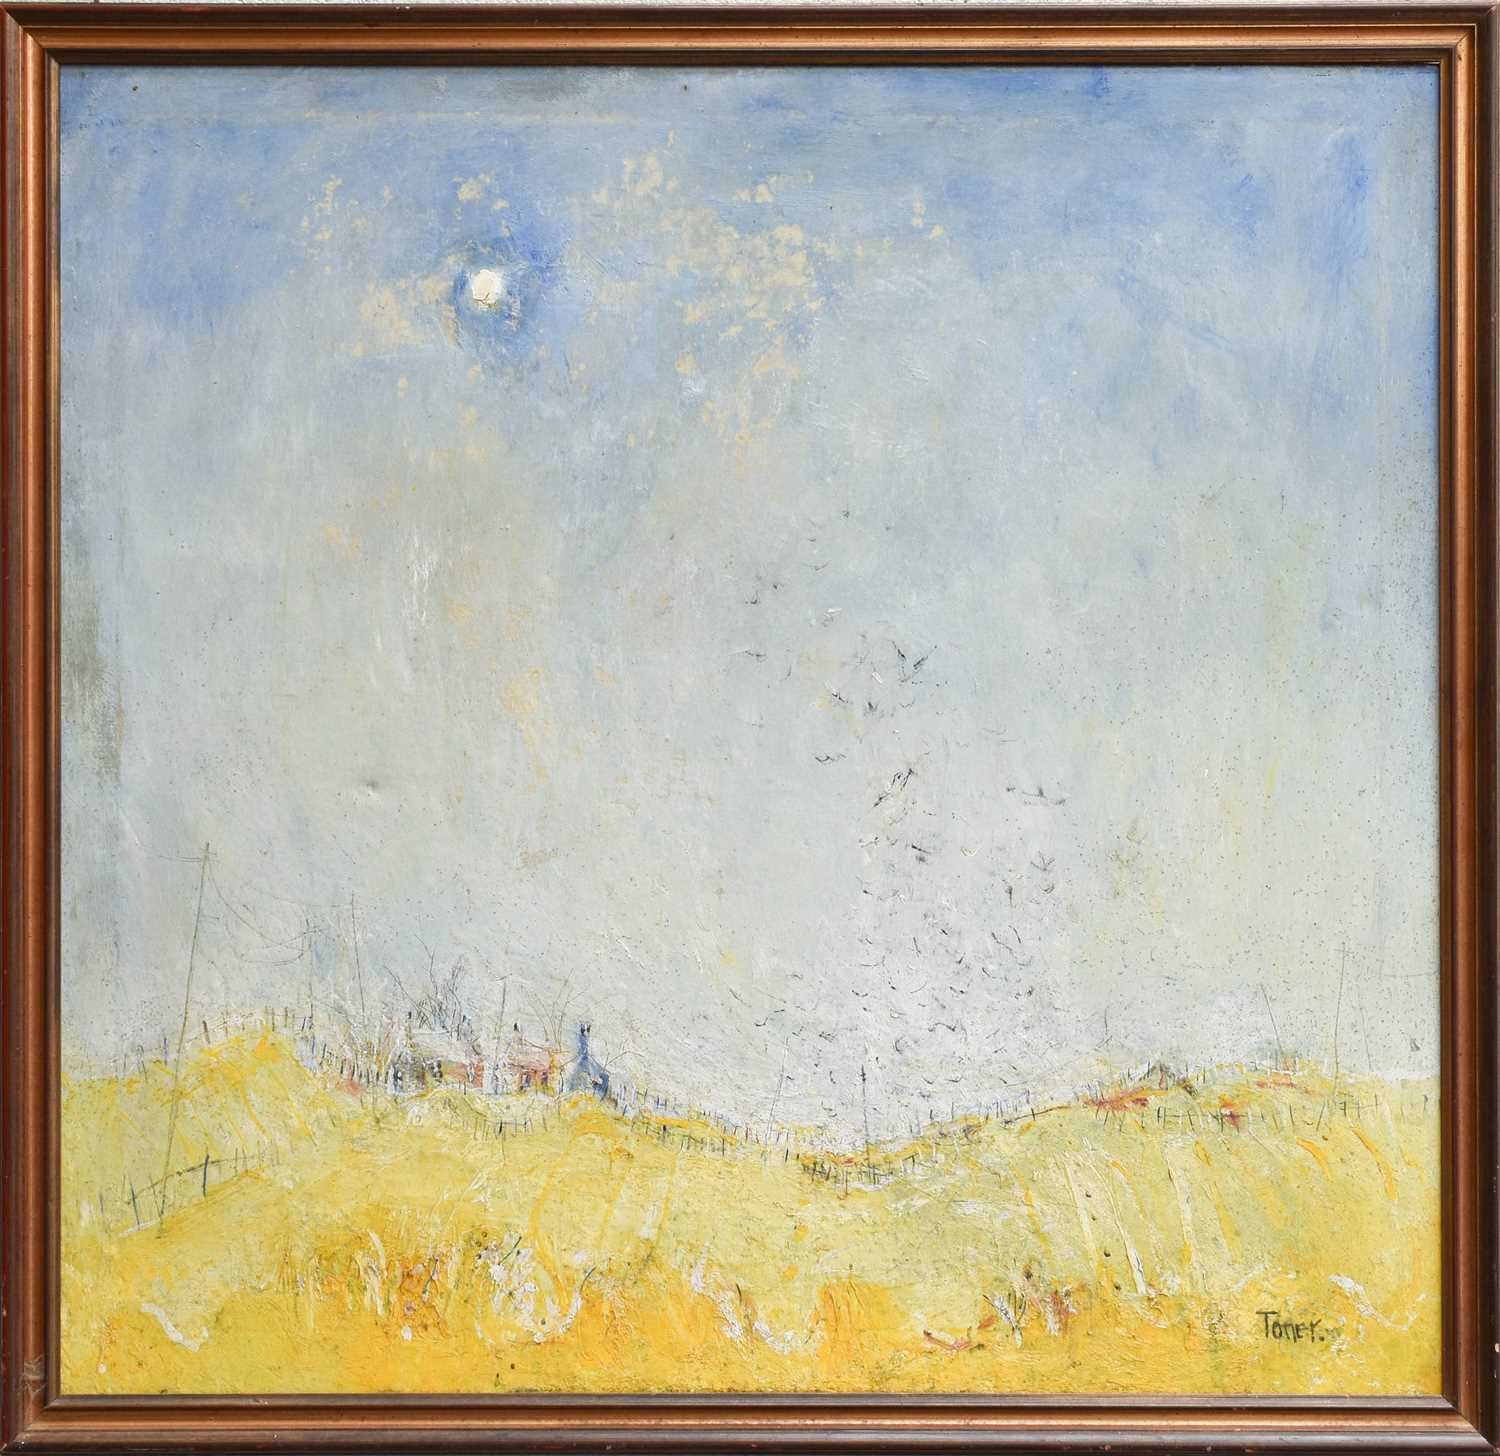 David Toner (Contemporary) Sunlit abstract landscape with birds rising Signed, oil on canvas, - Image 2 of 2